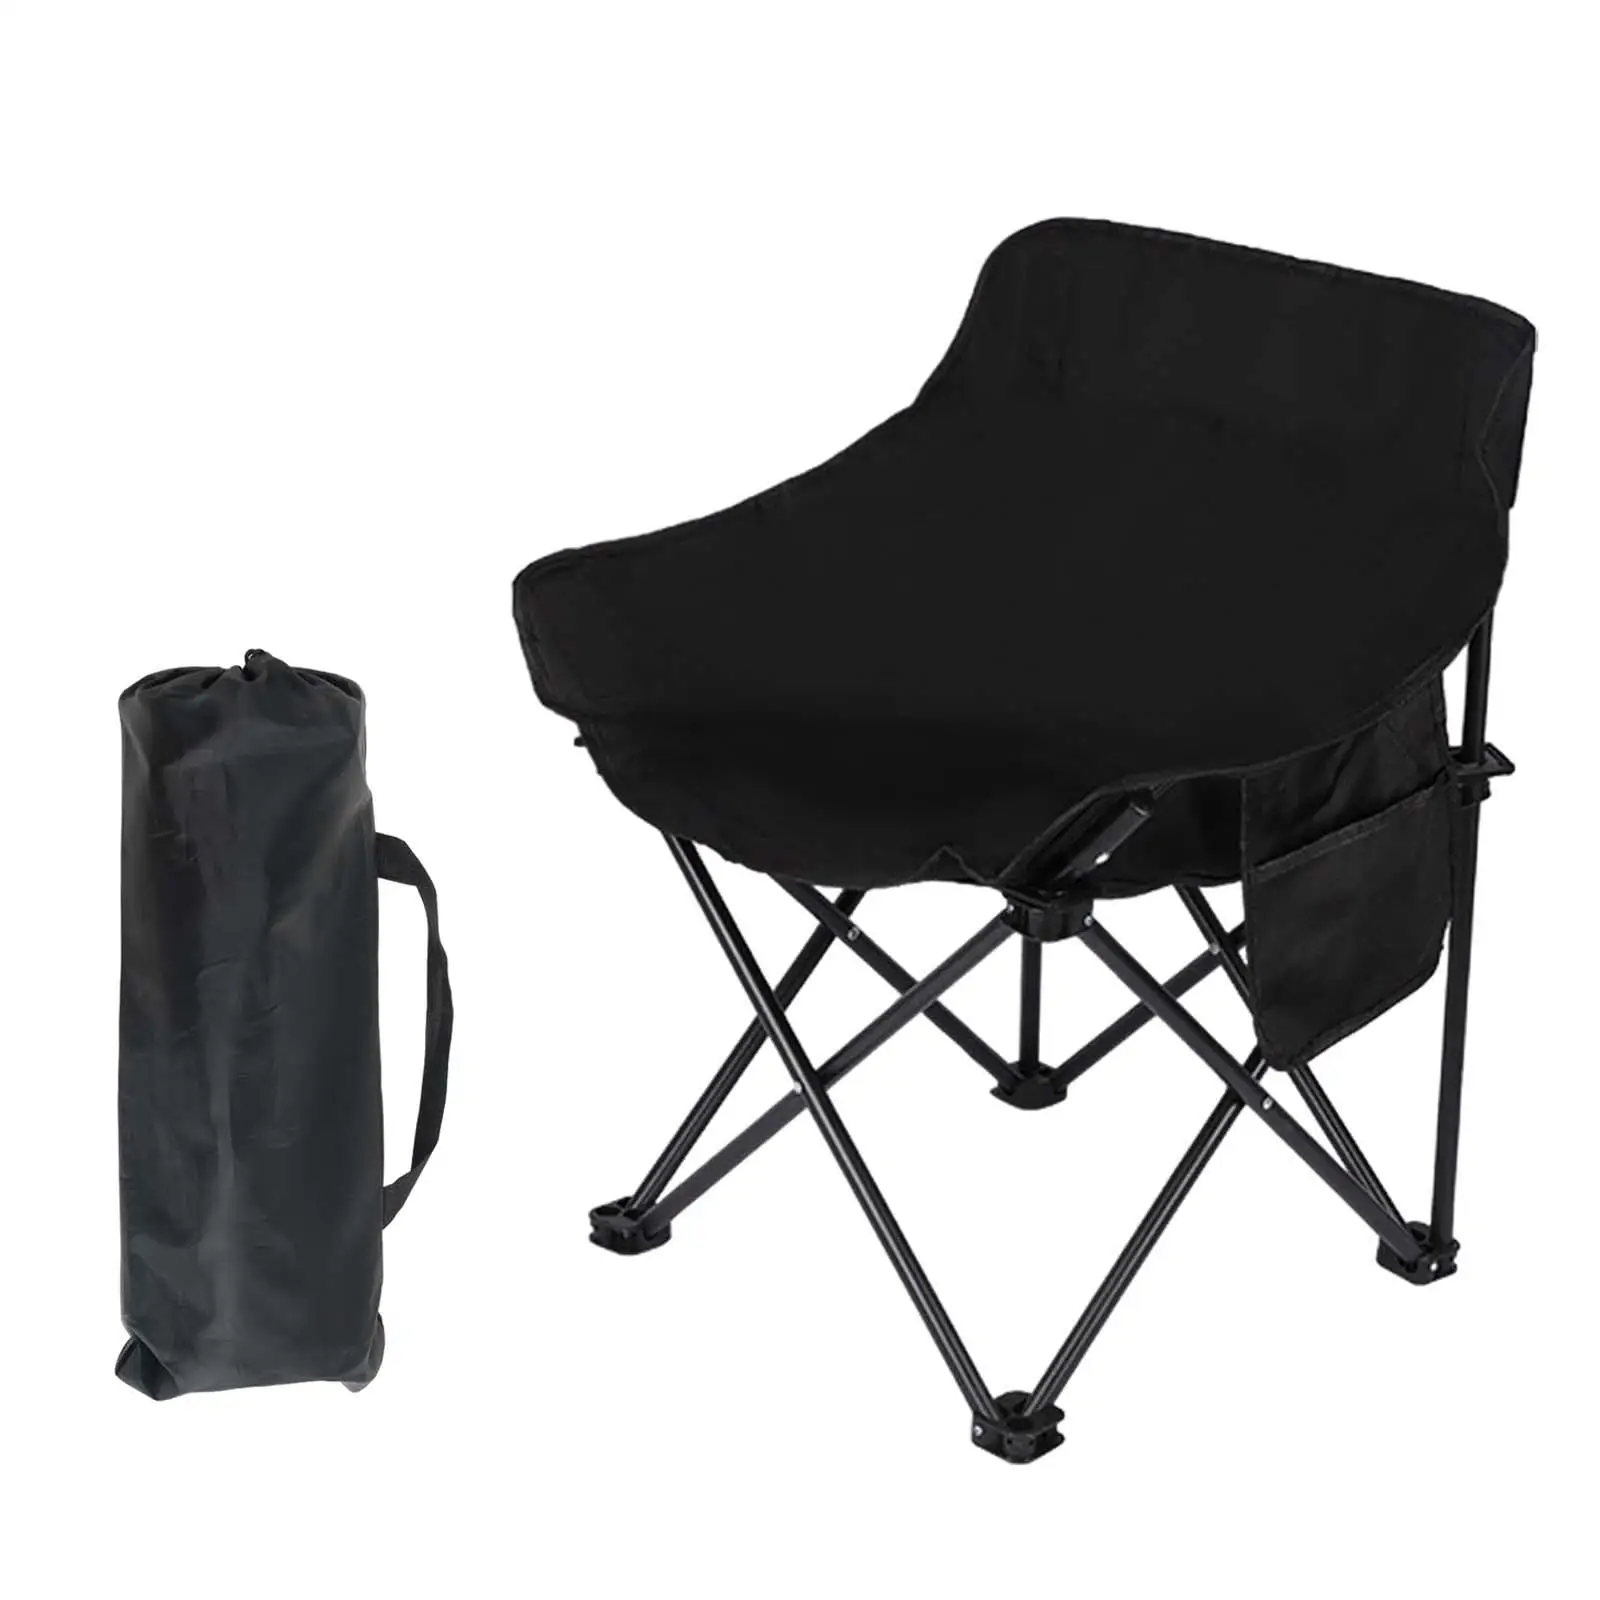 Folding Camping Chair Outdoor Moon Chair with Pocket 150kg Heavy Duty Nonslip Beach Chair Portable Folding Chair for Backyard